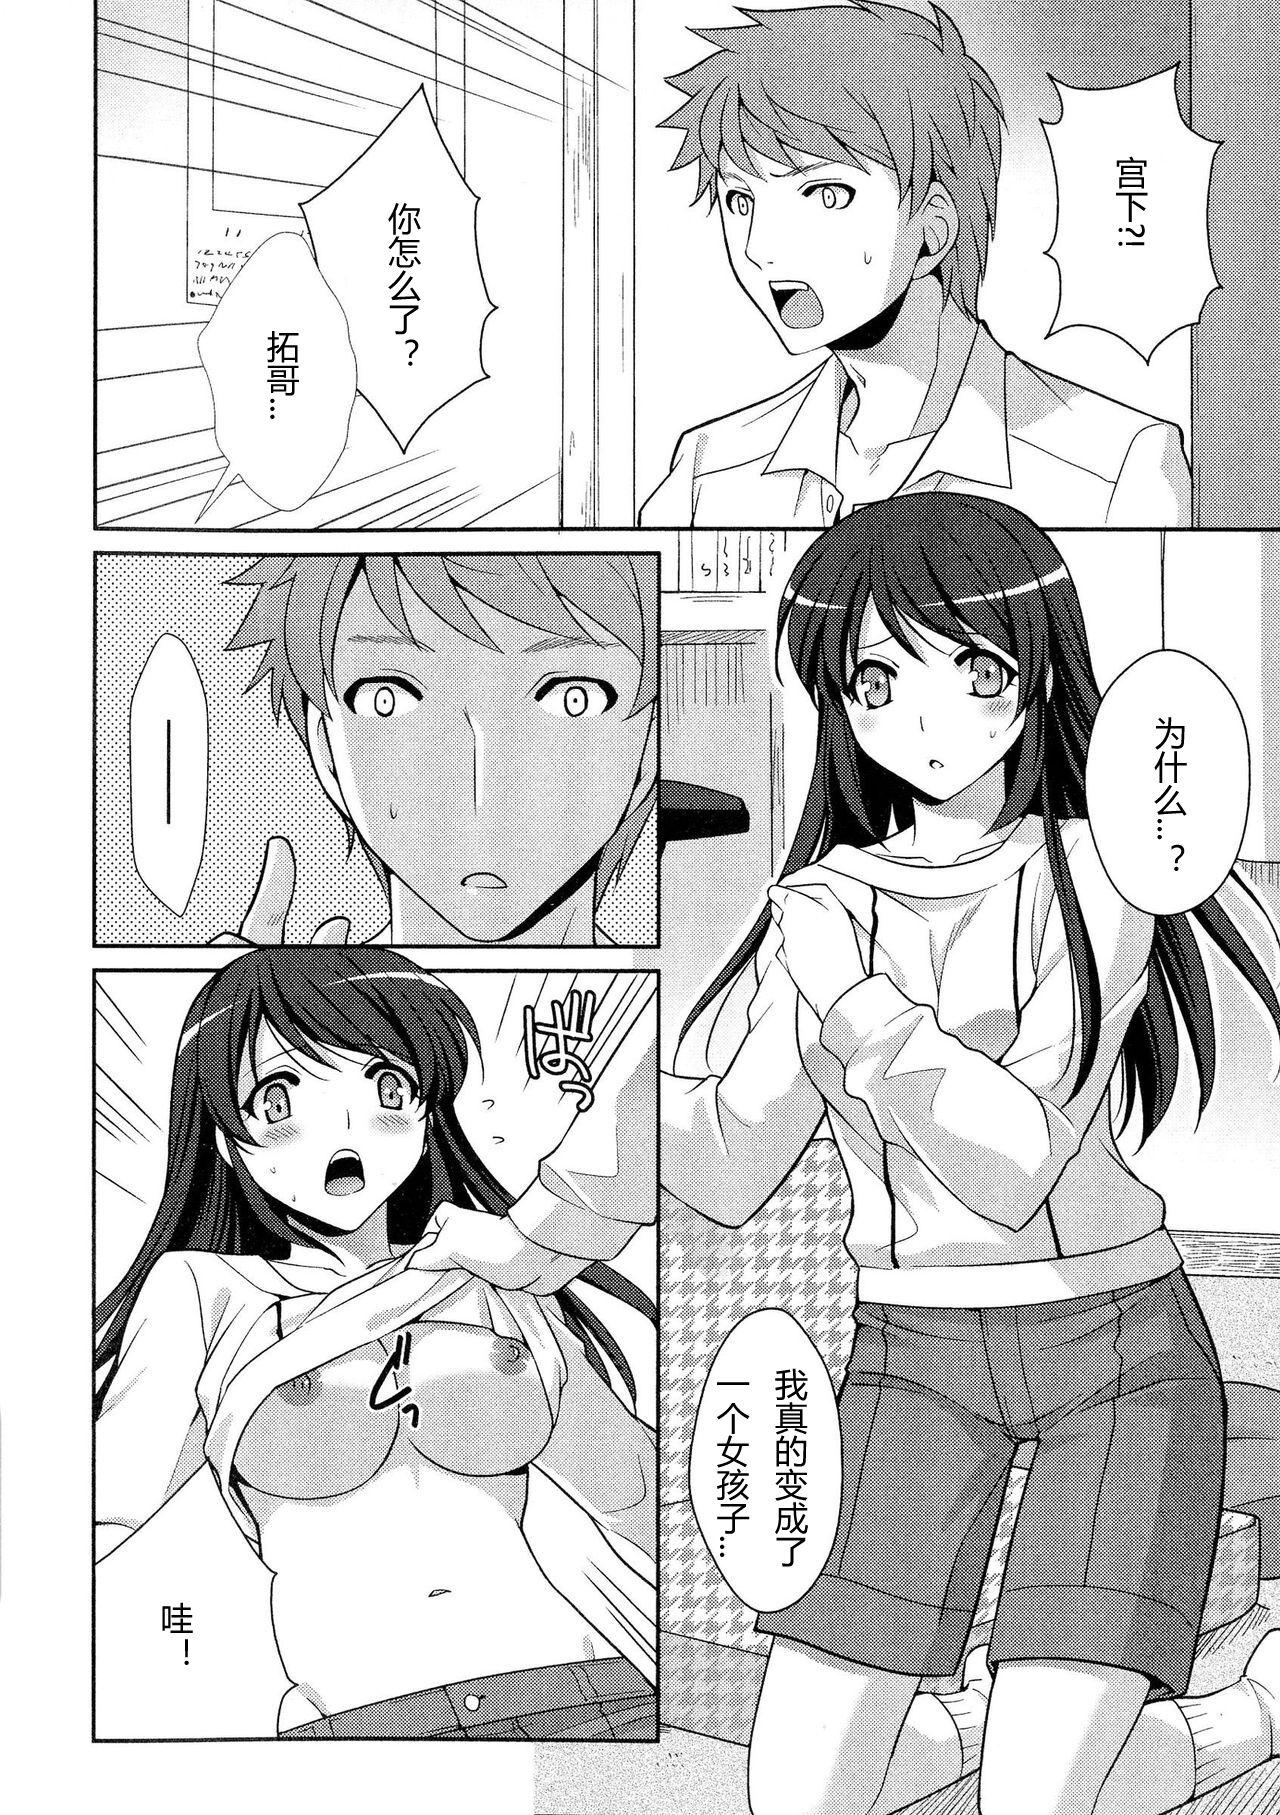 Rough Porn Omajinai wa Hodohodo ni! | Don't go too crazy with magic spells! Jerking Off - Page 4